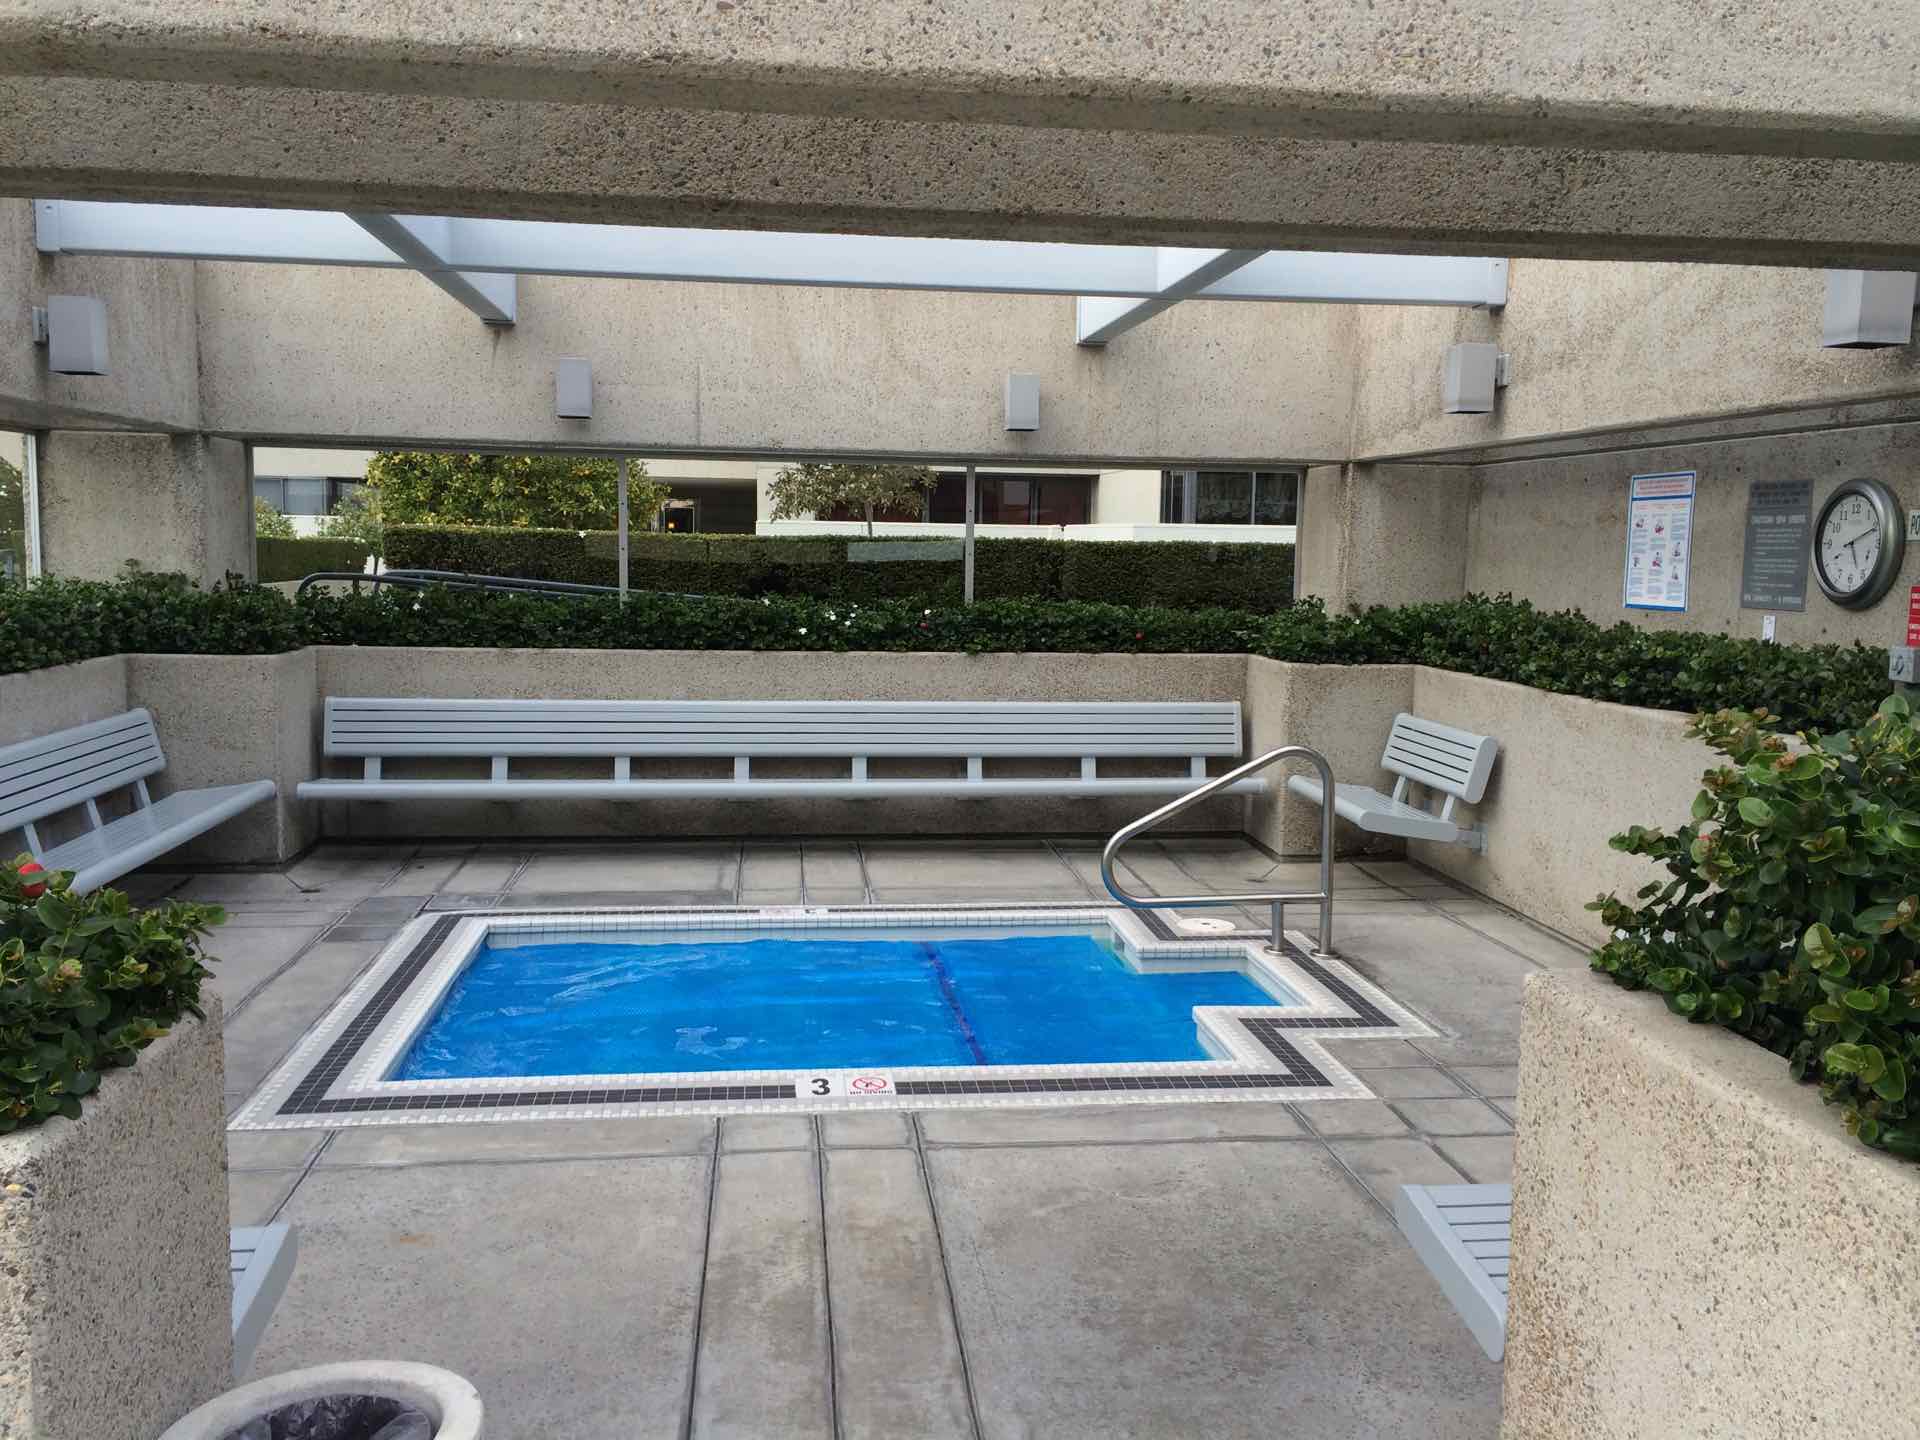 Spa next to pool deck